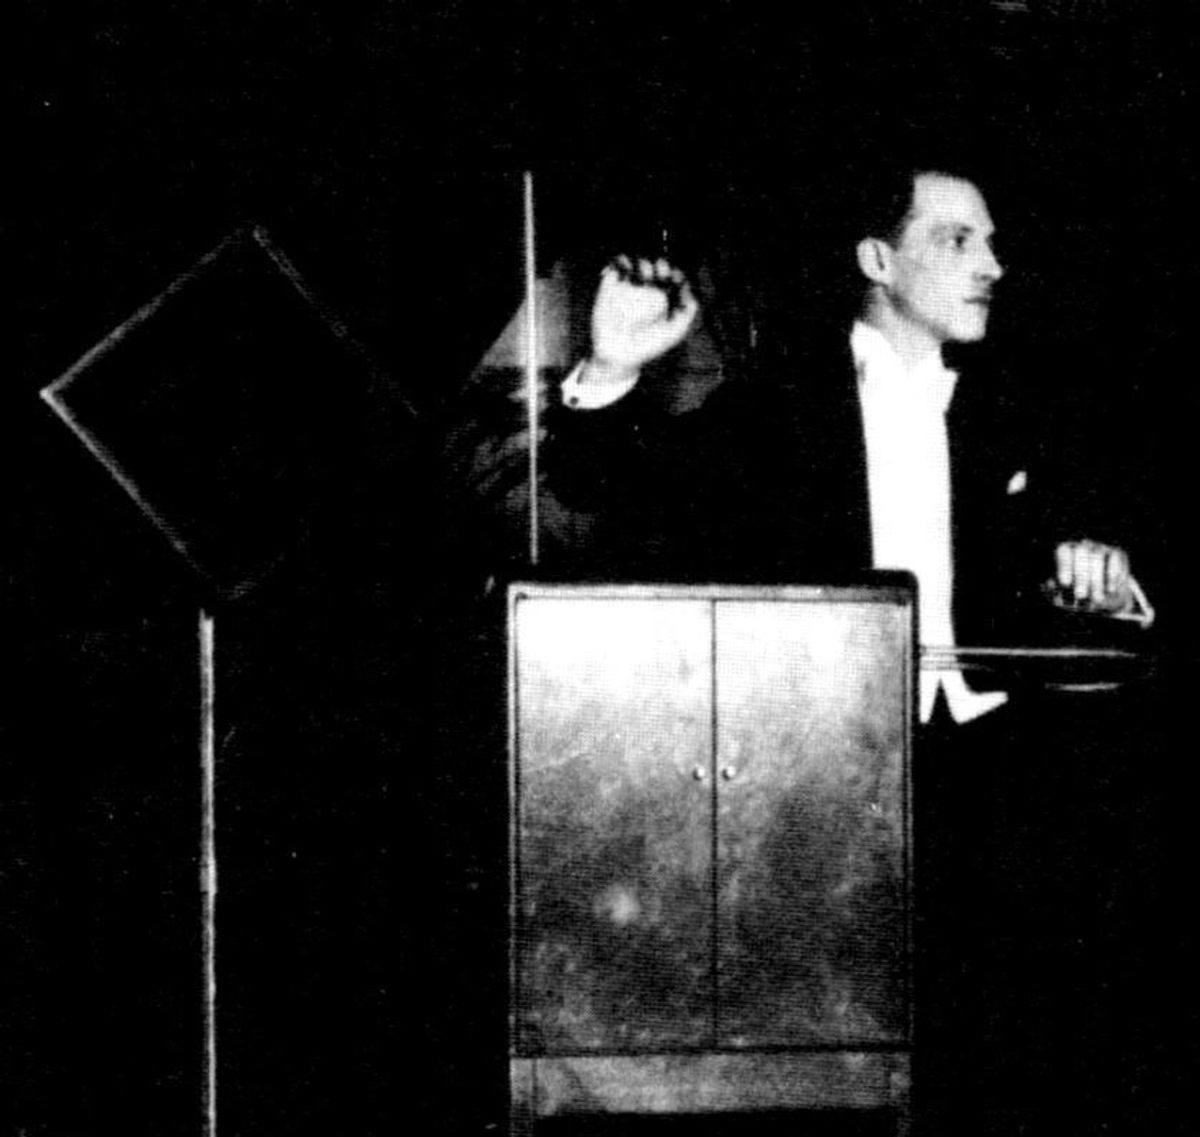 5 Secrets for Mastering the Theremin, From the Legendary Clara Rockmore -  Atlas Obscura